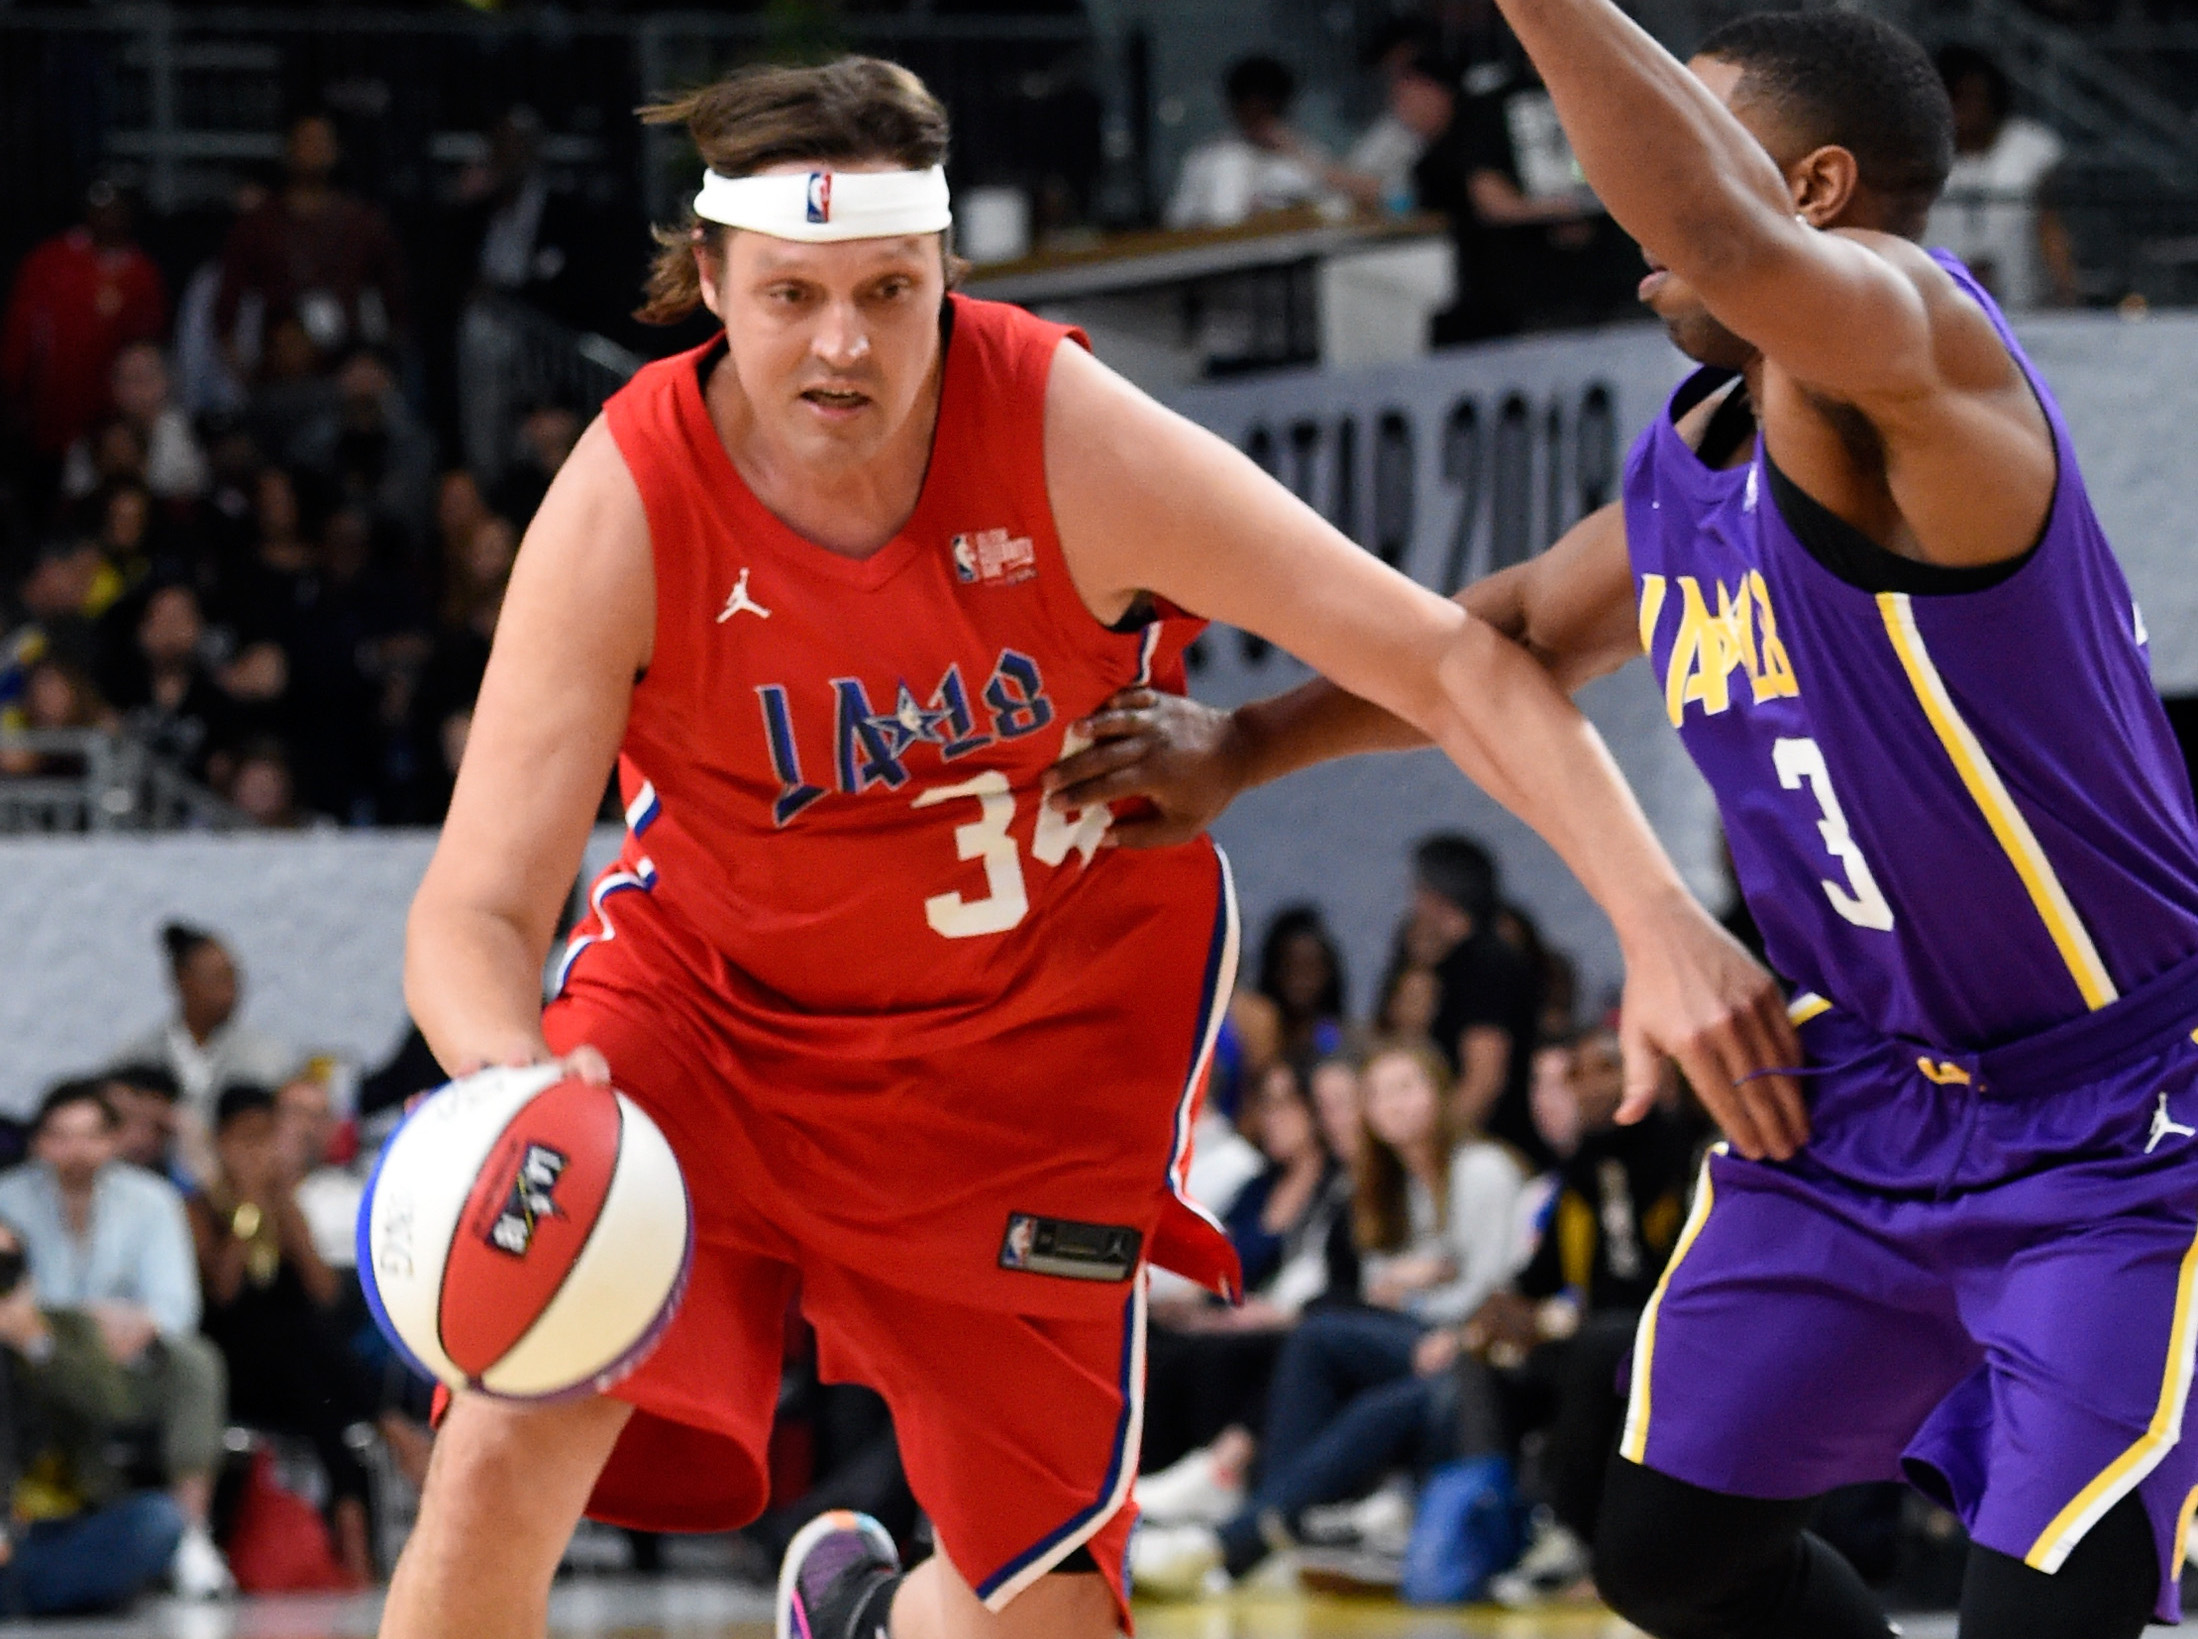 Watch Win Butler Play In The NBA Celebrity All-Star Game